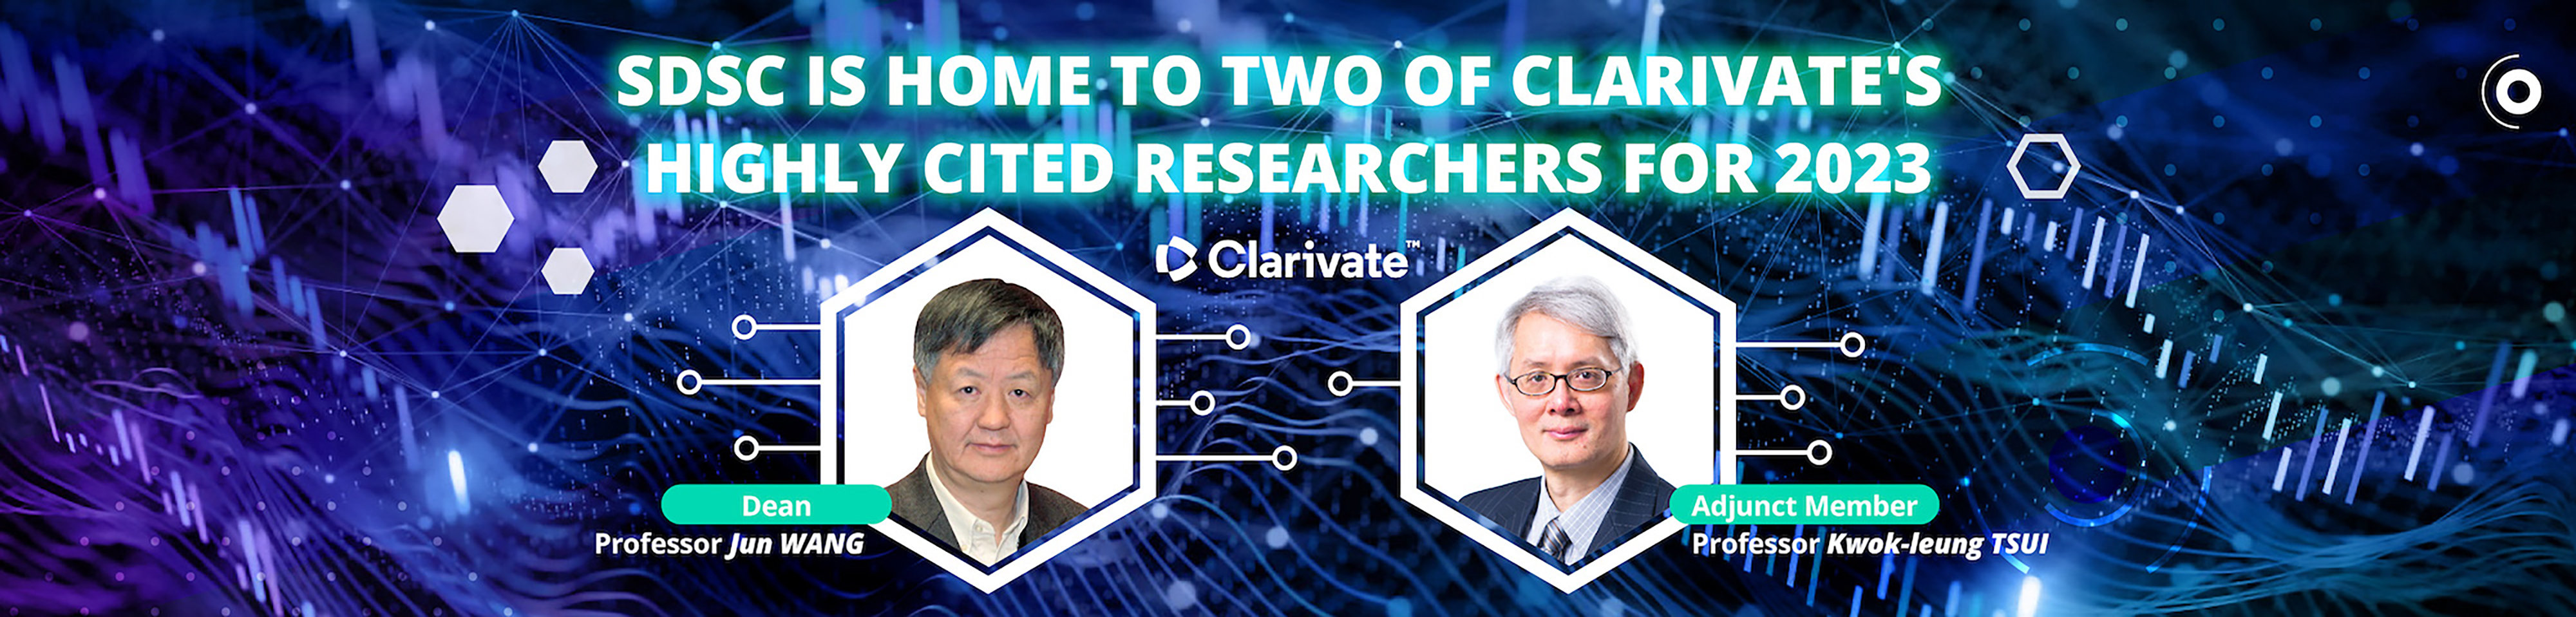 Two of Clarivate's highly cited researchers 2023-final